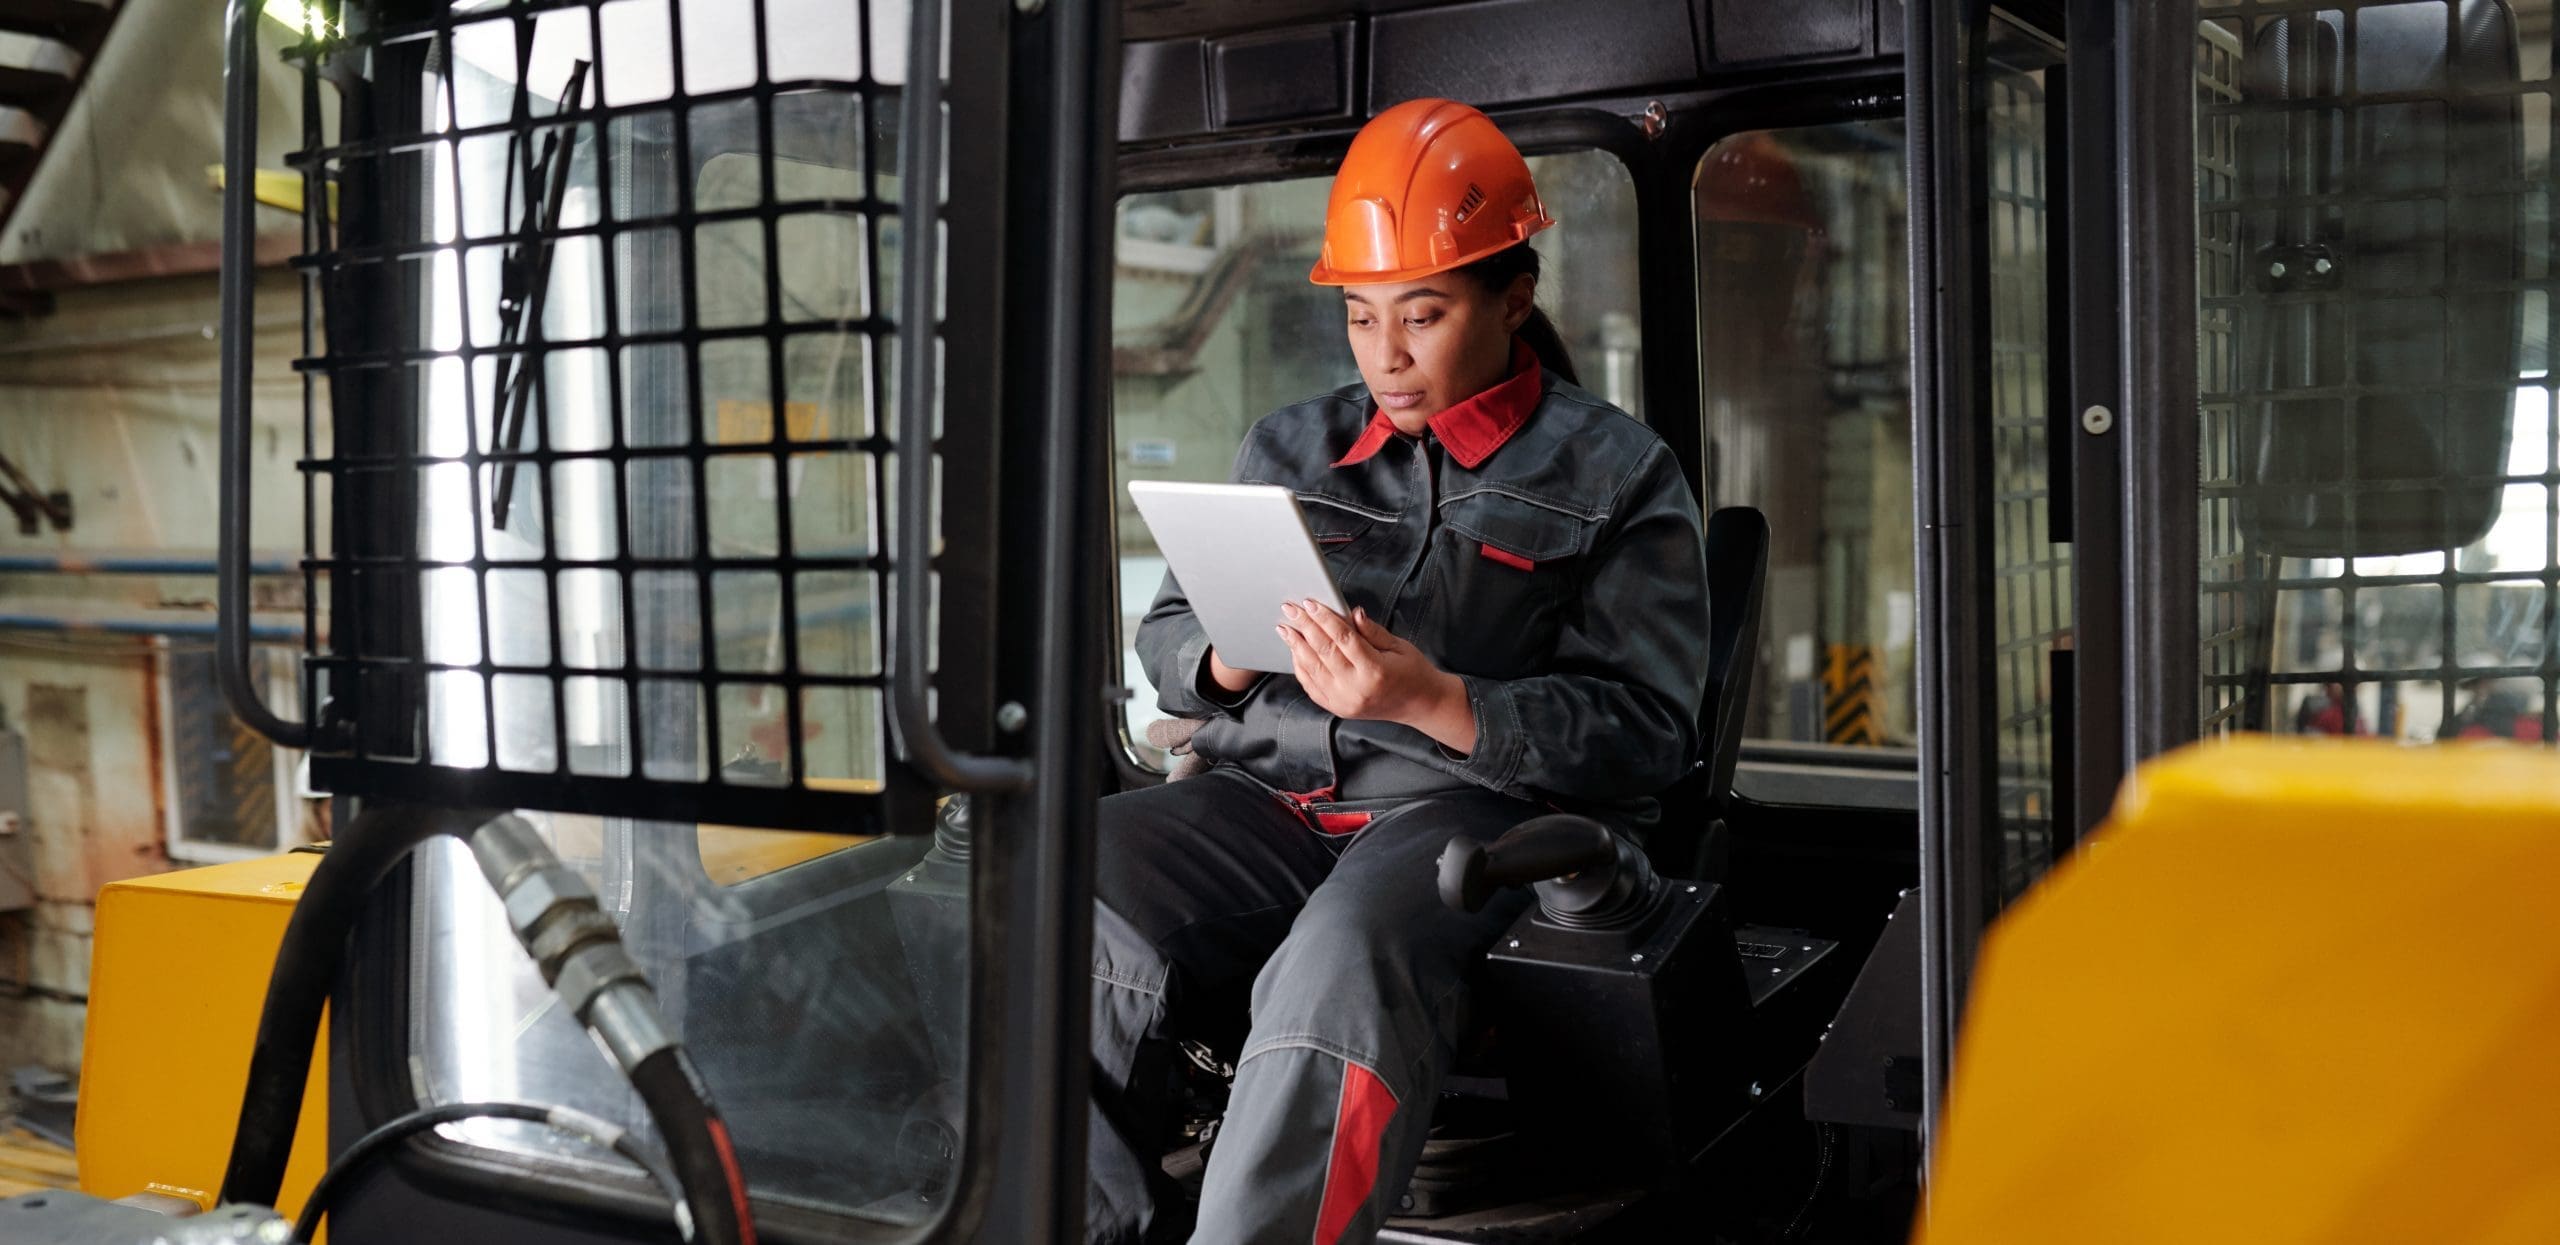 Female construction worker solving supply chain issues with digital tablet